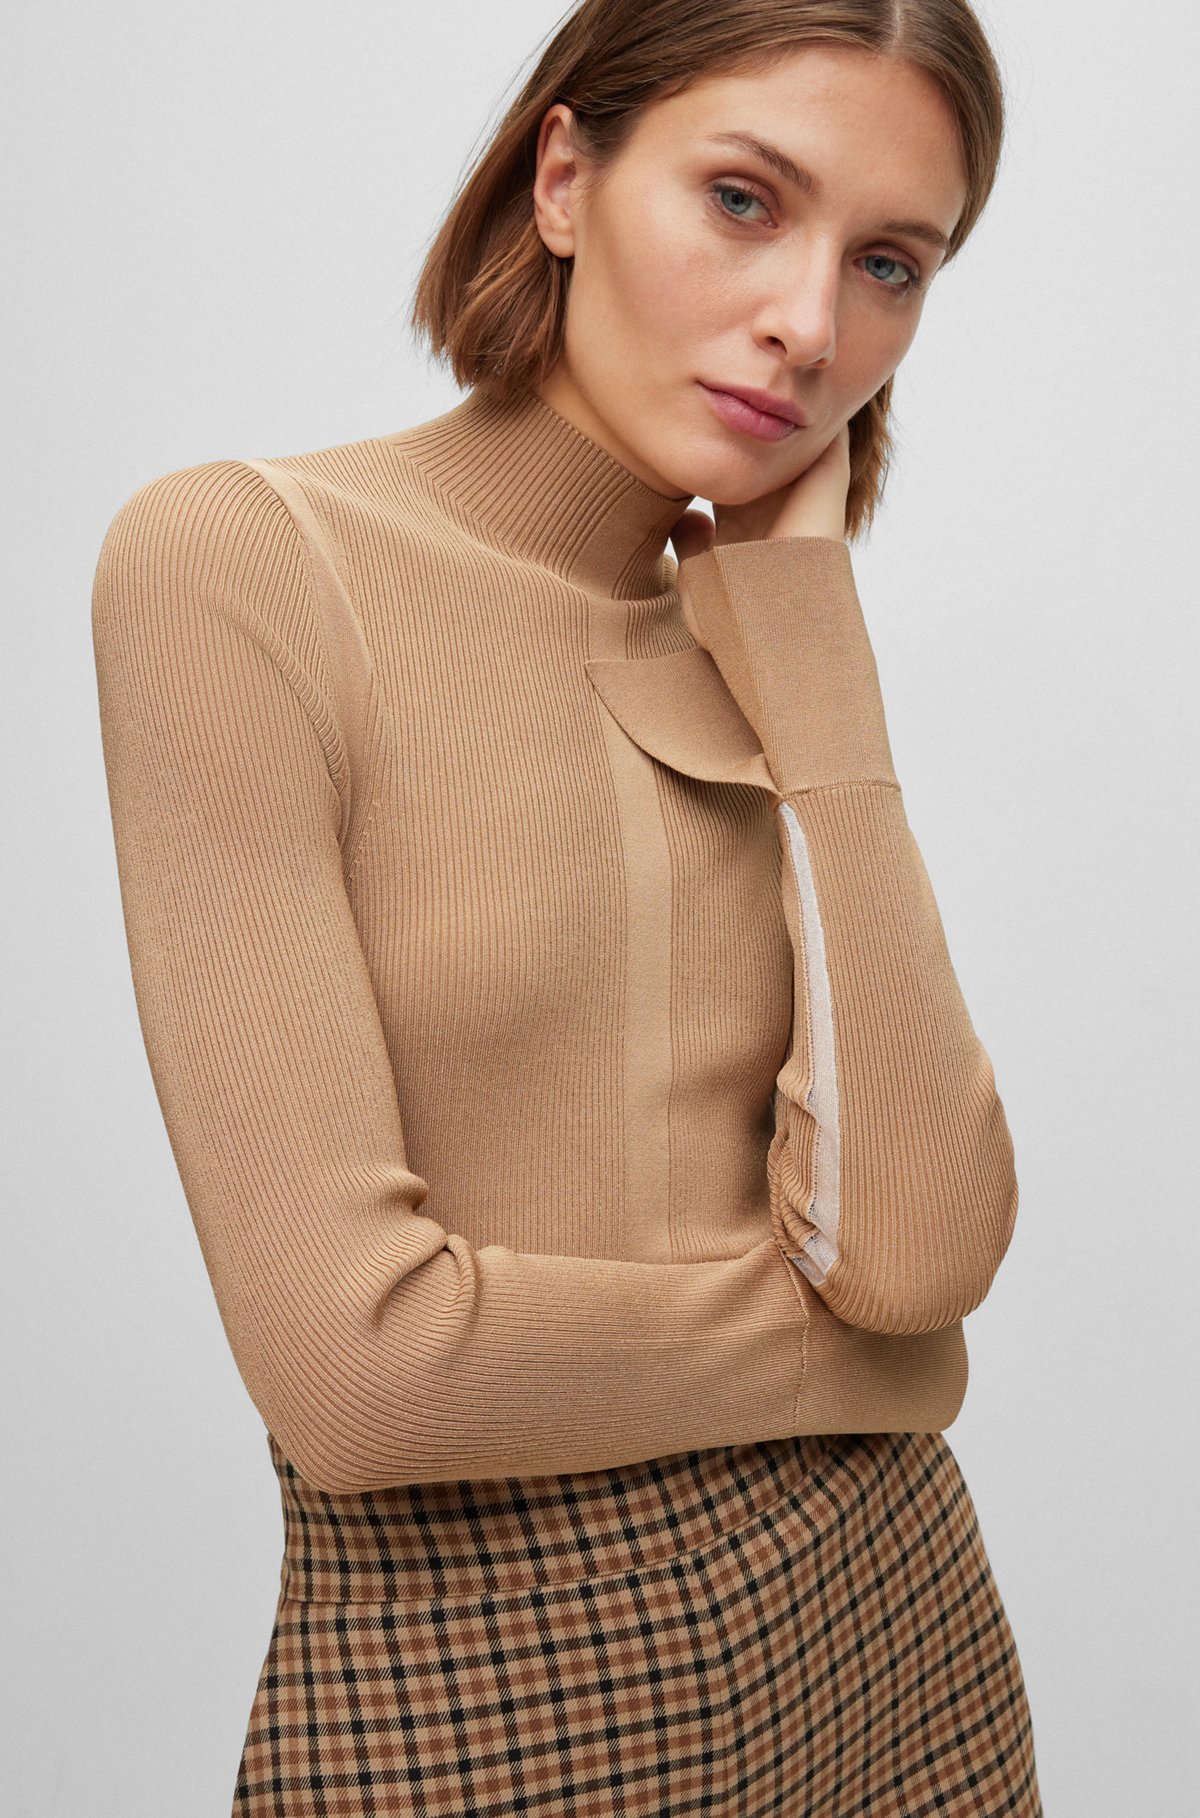 High-neck sweater in a ribbed knit